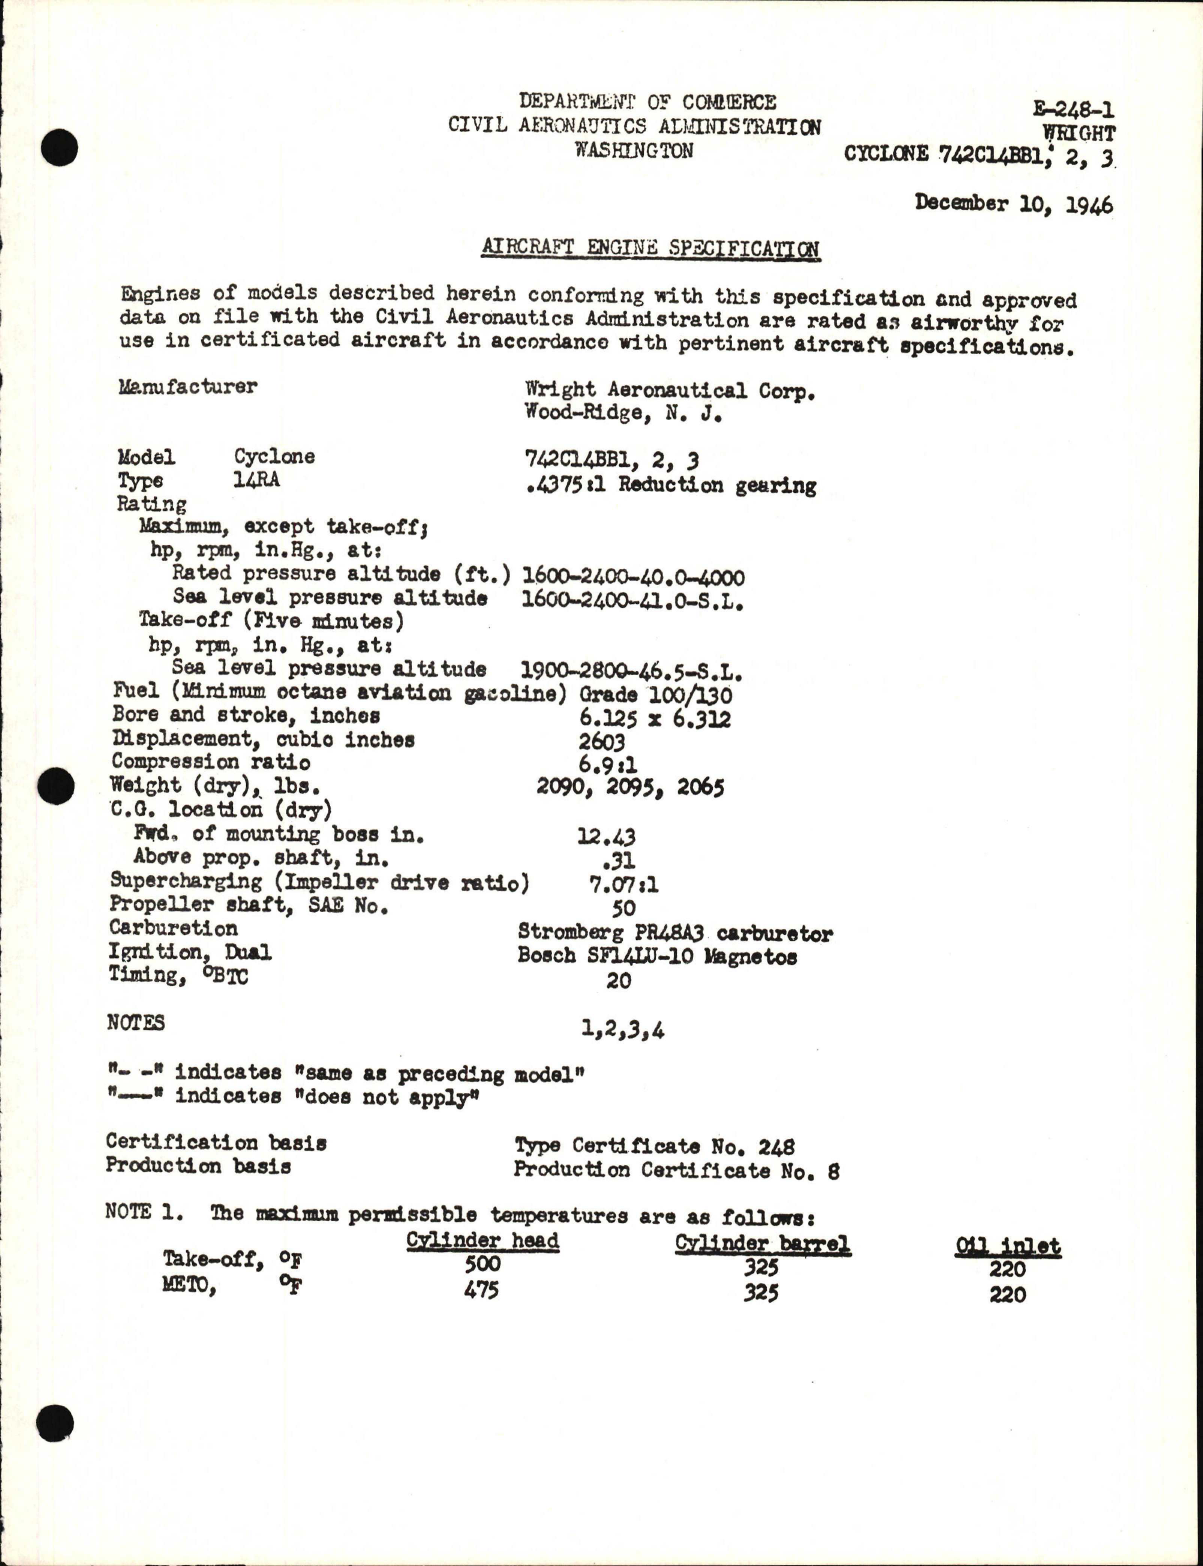 Sample page 1 from AirCorps Library document: 742C14BB1, 2, 3, Cyclone